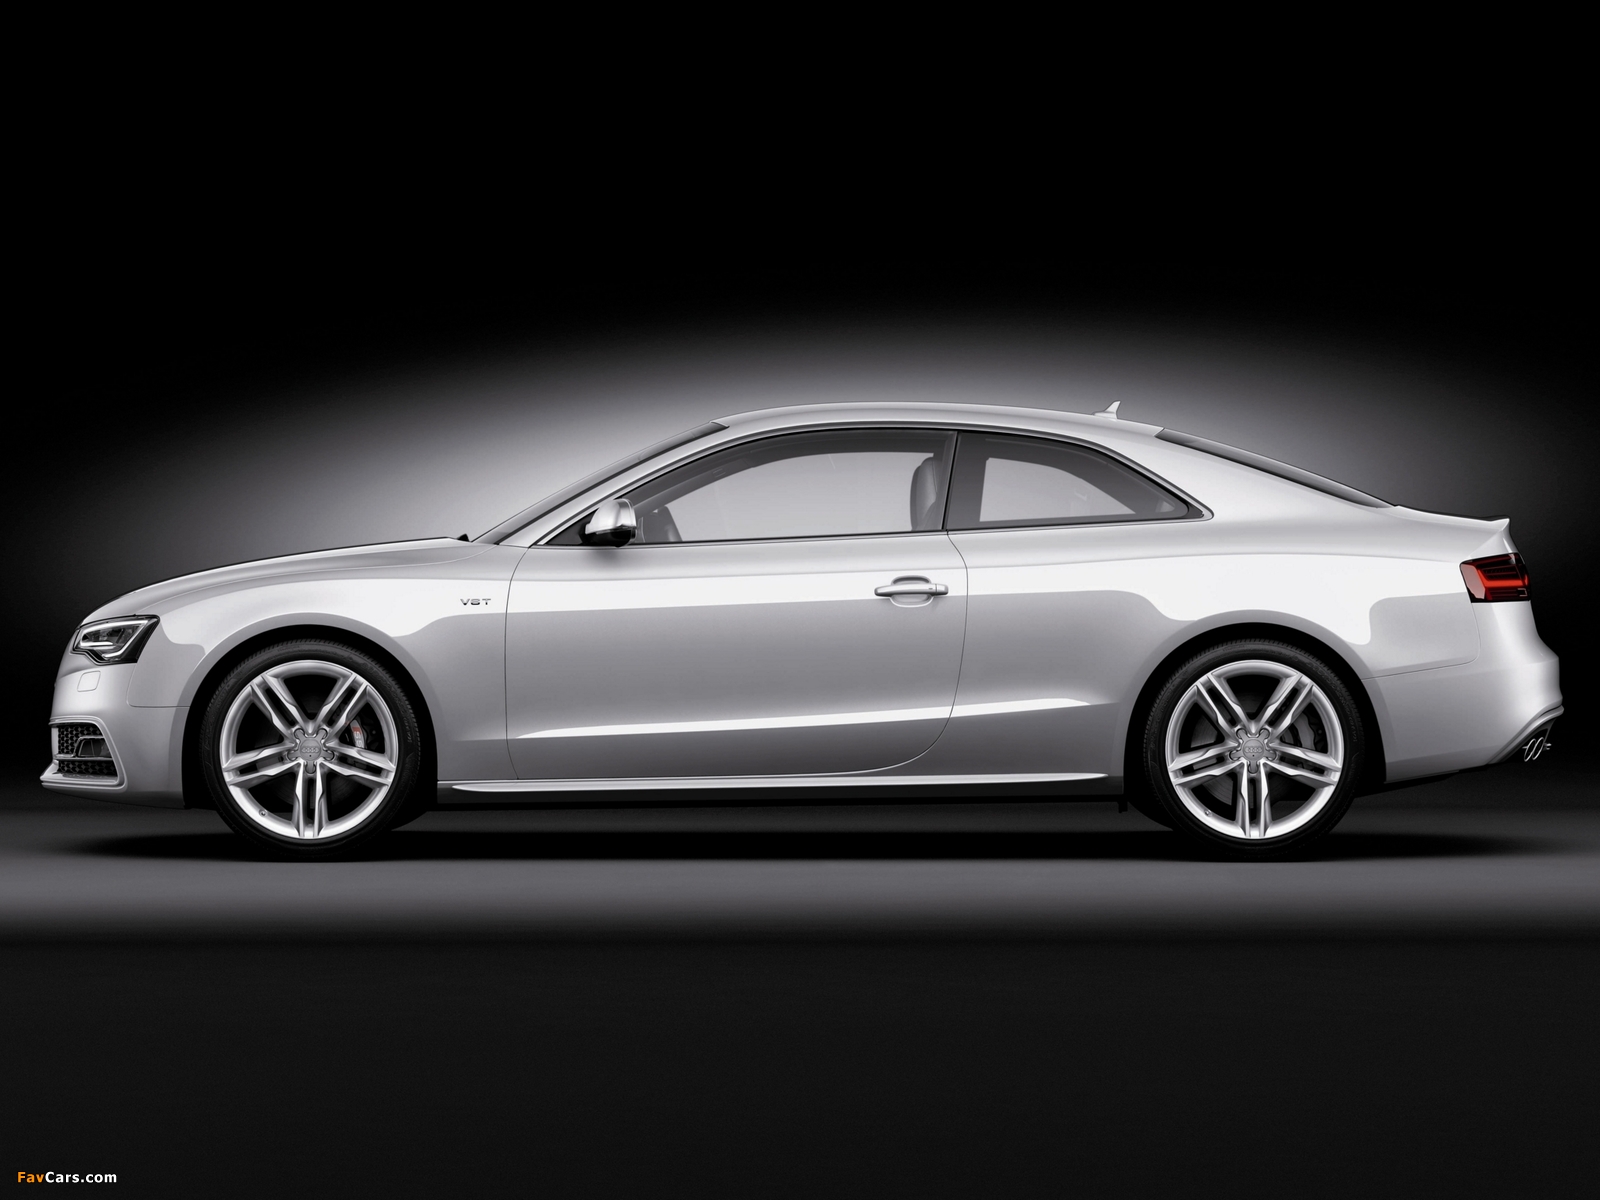 Photos of Audi S5 Coupe 2011 (1600 x 1200)